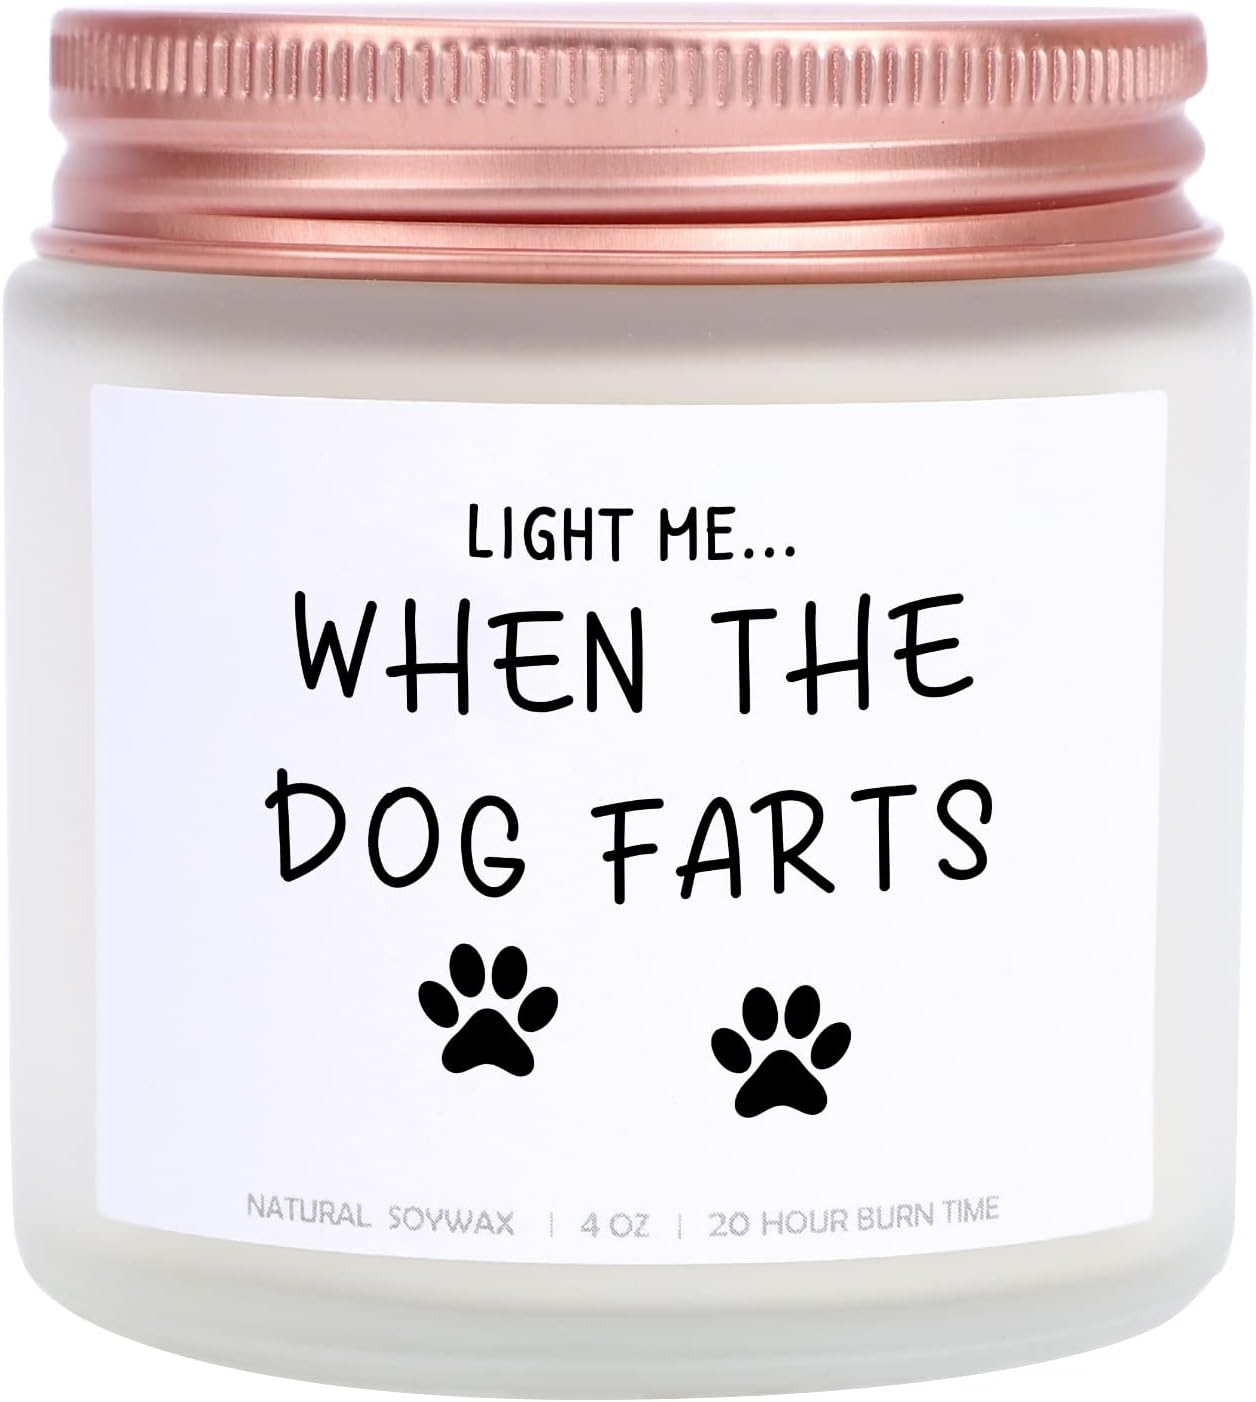 Butitnow Lavender Scented Soy Candles - Light Me When The Dog F**ts Candle